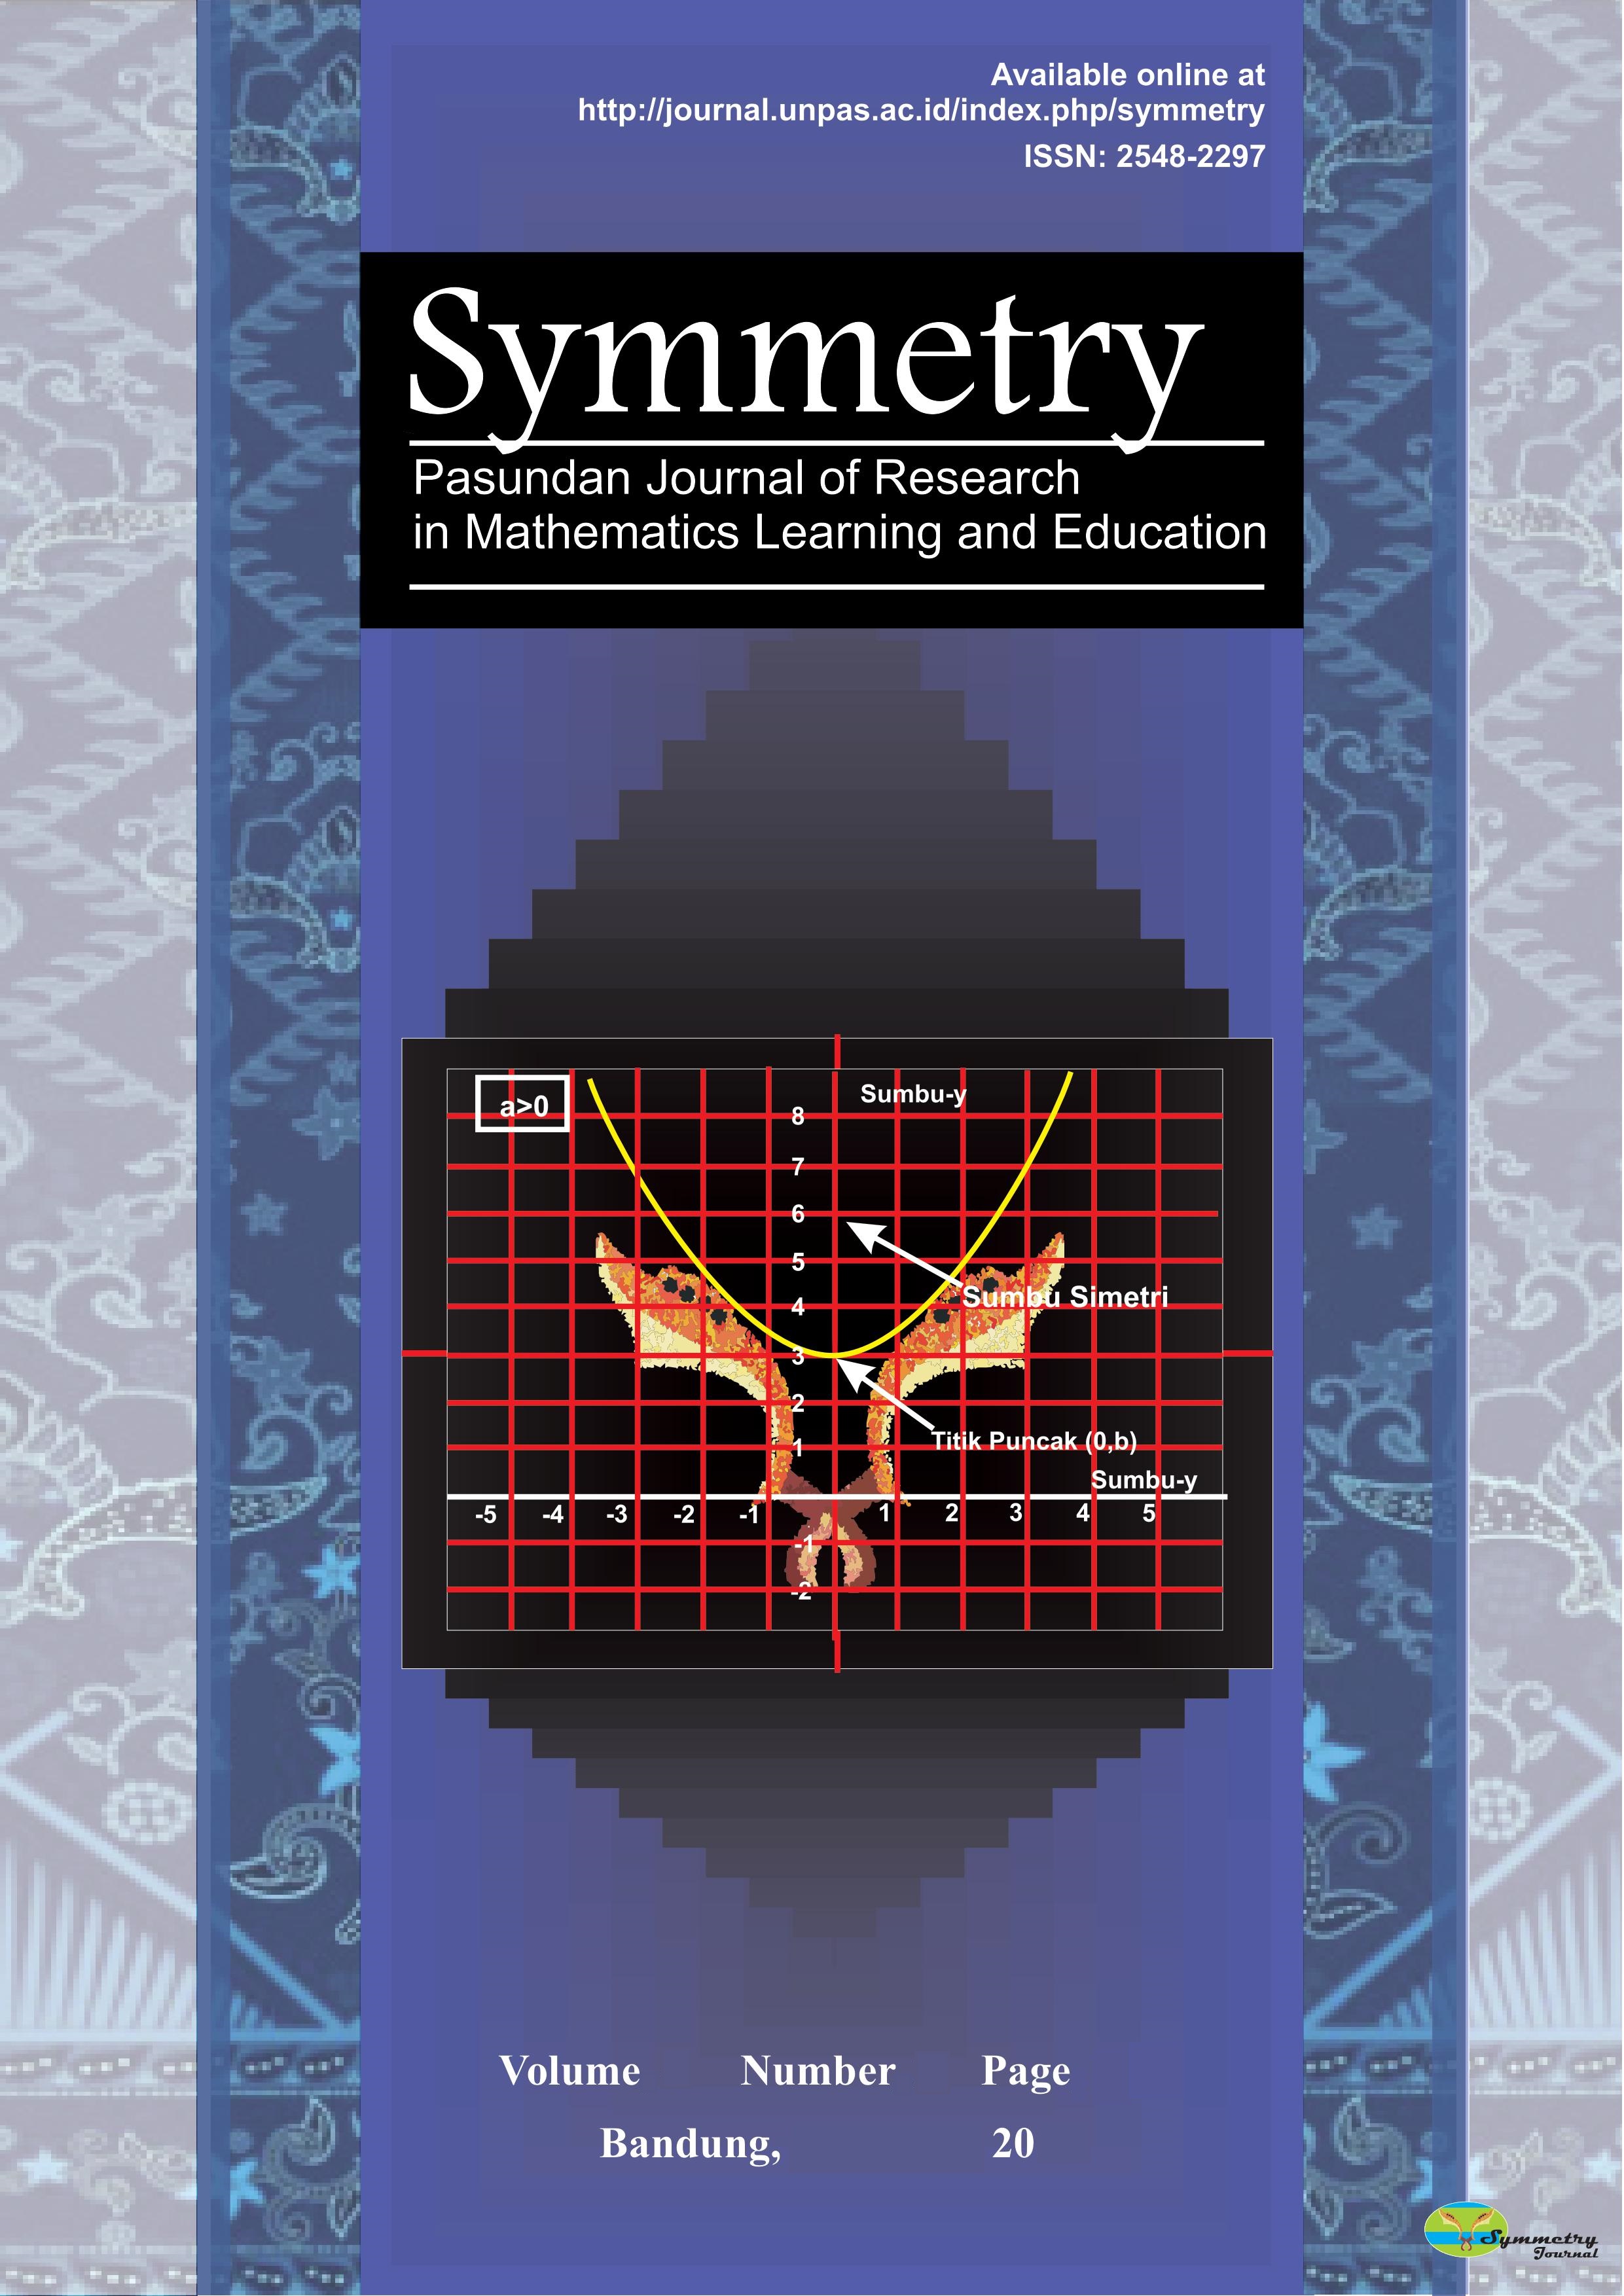 					View Vol. 7 No. 2 (2022): Symmetry: Pasundan Journal of Research in Mathematics Learning and Education
				